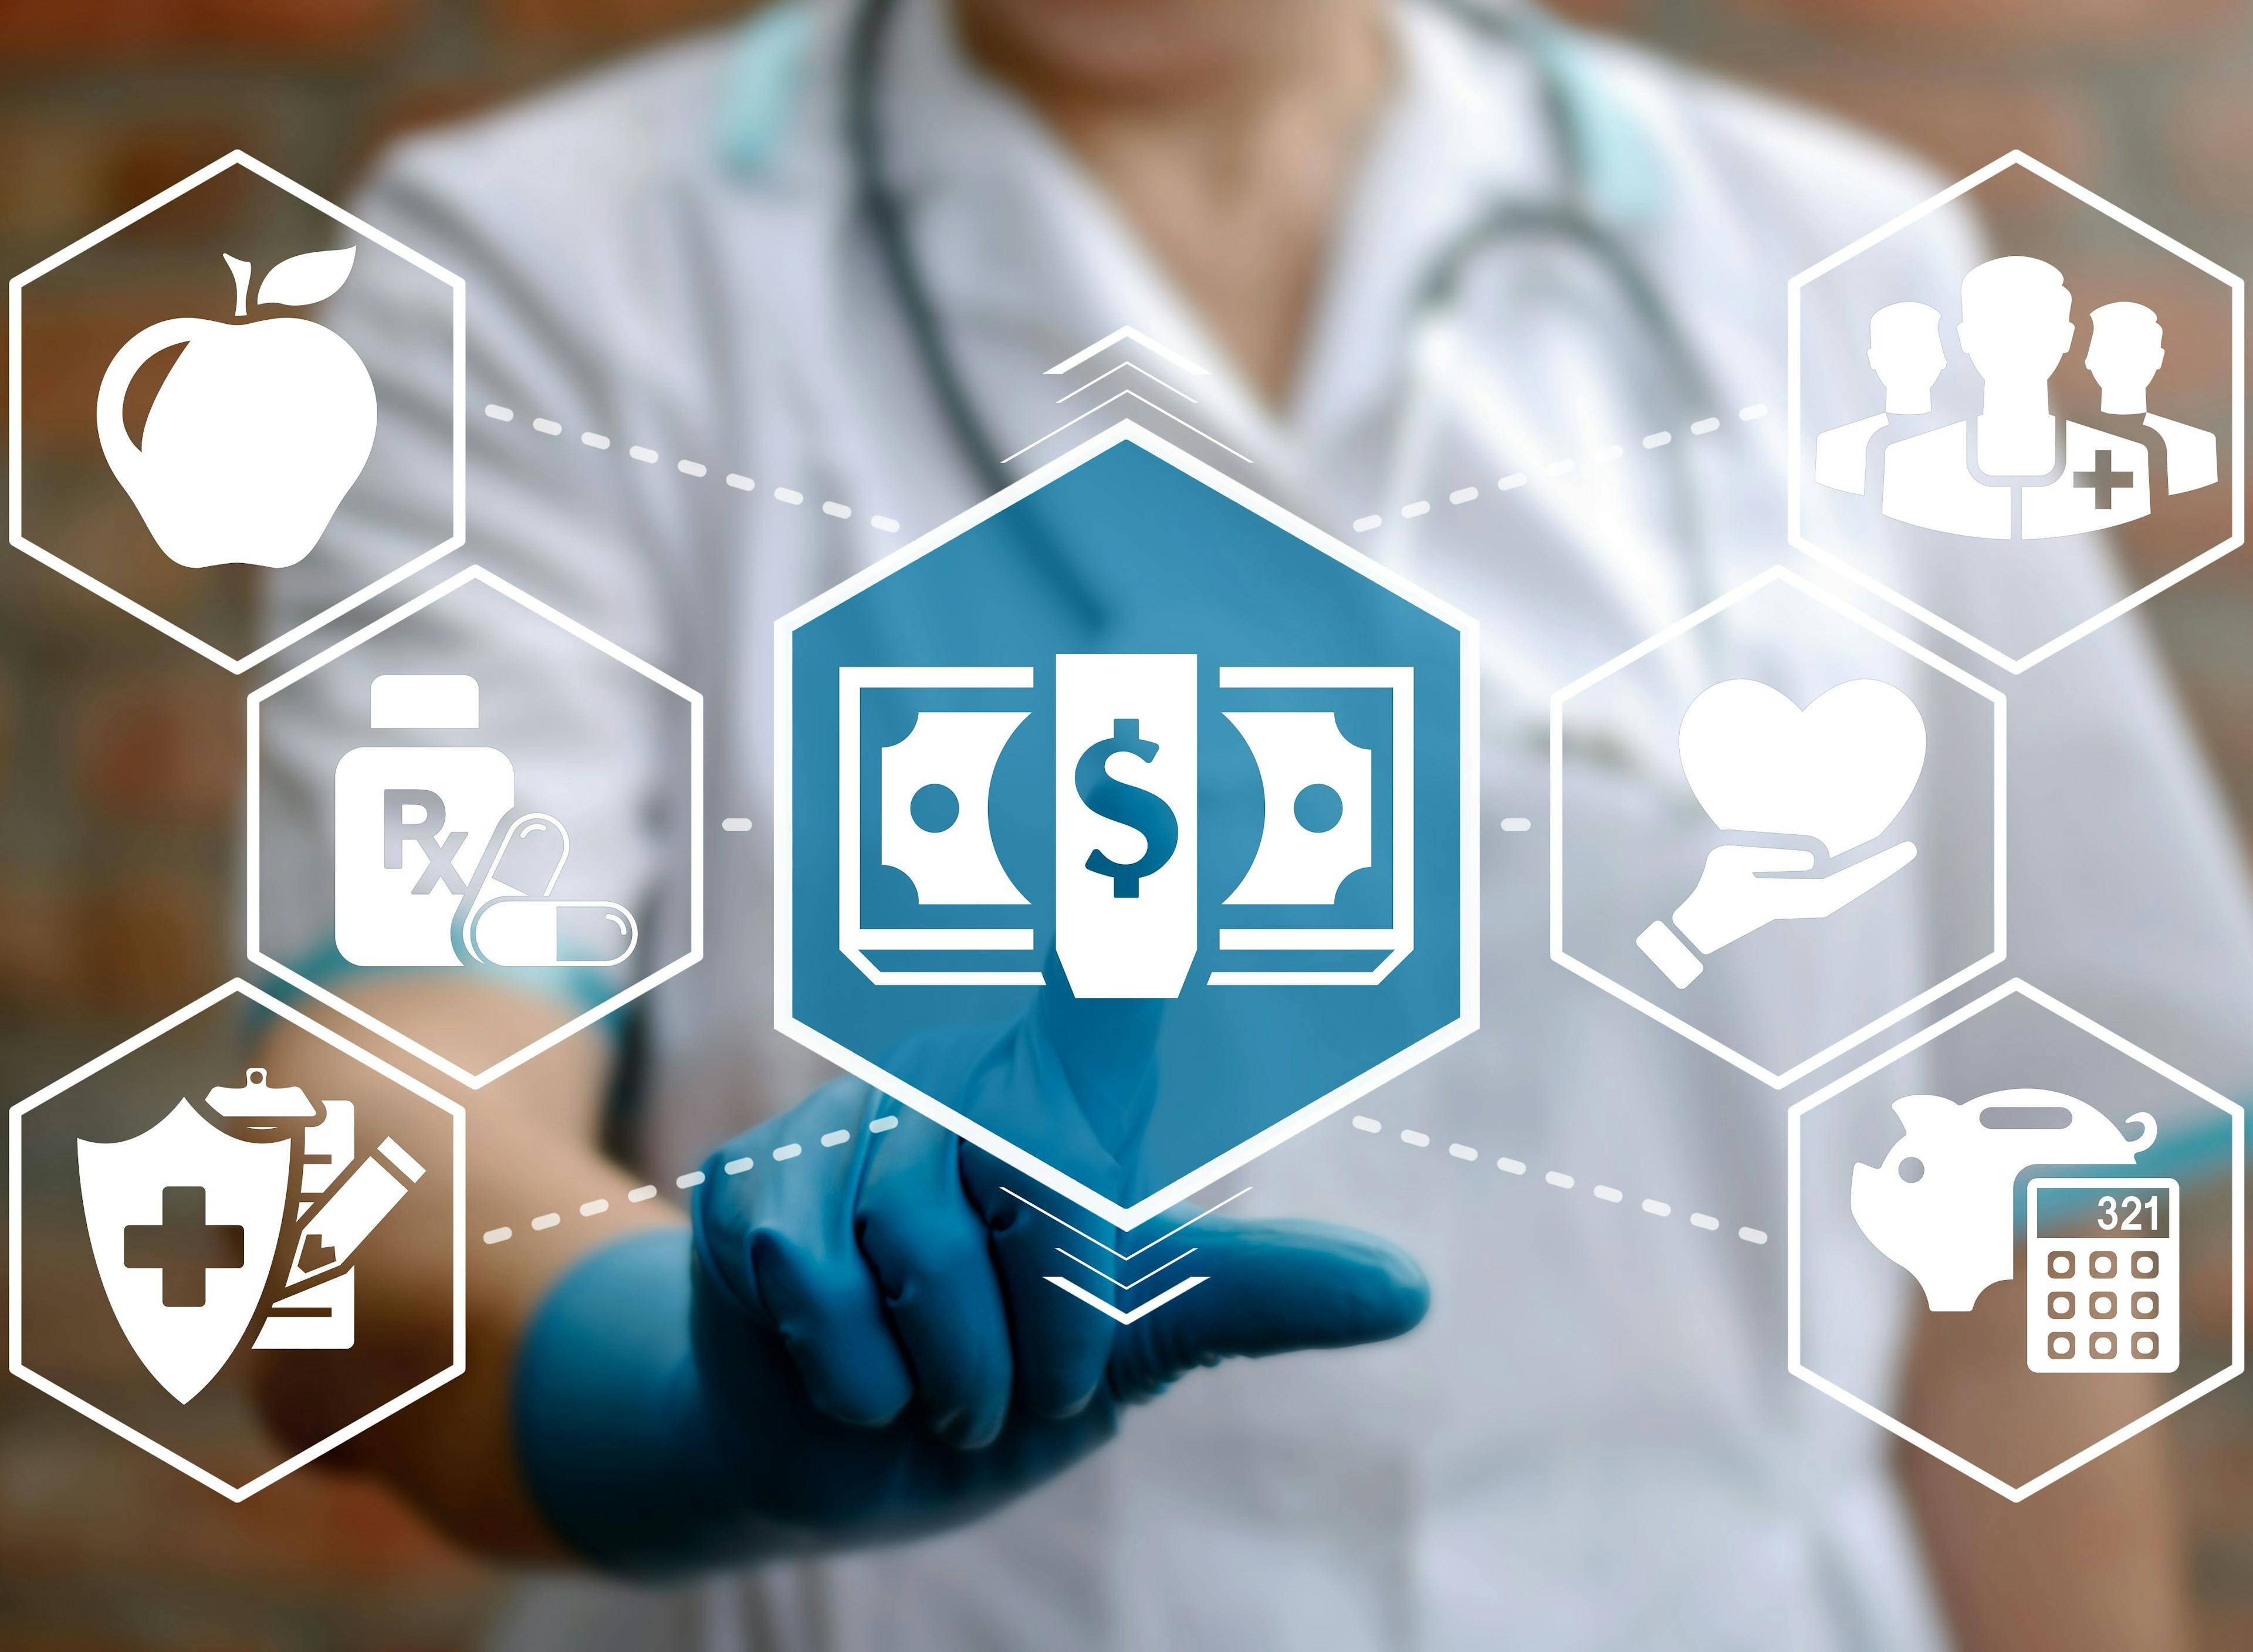 image of a health care provider and various icons indicating health and cost